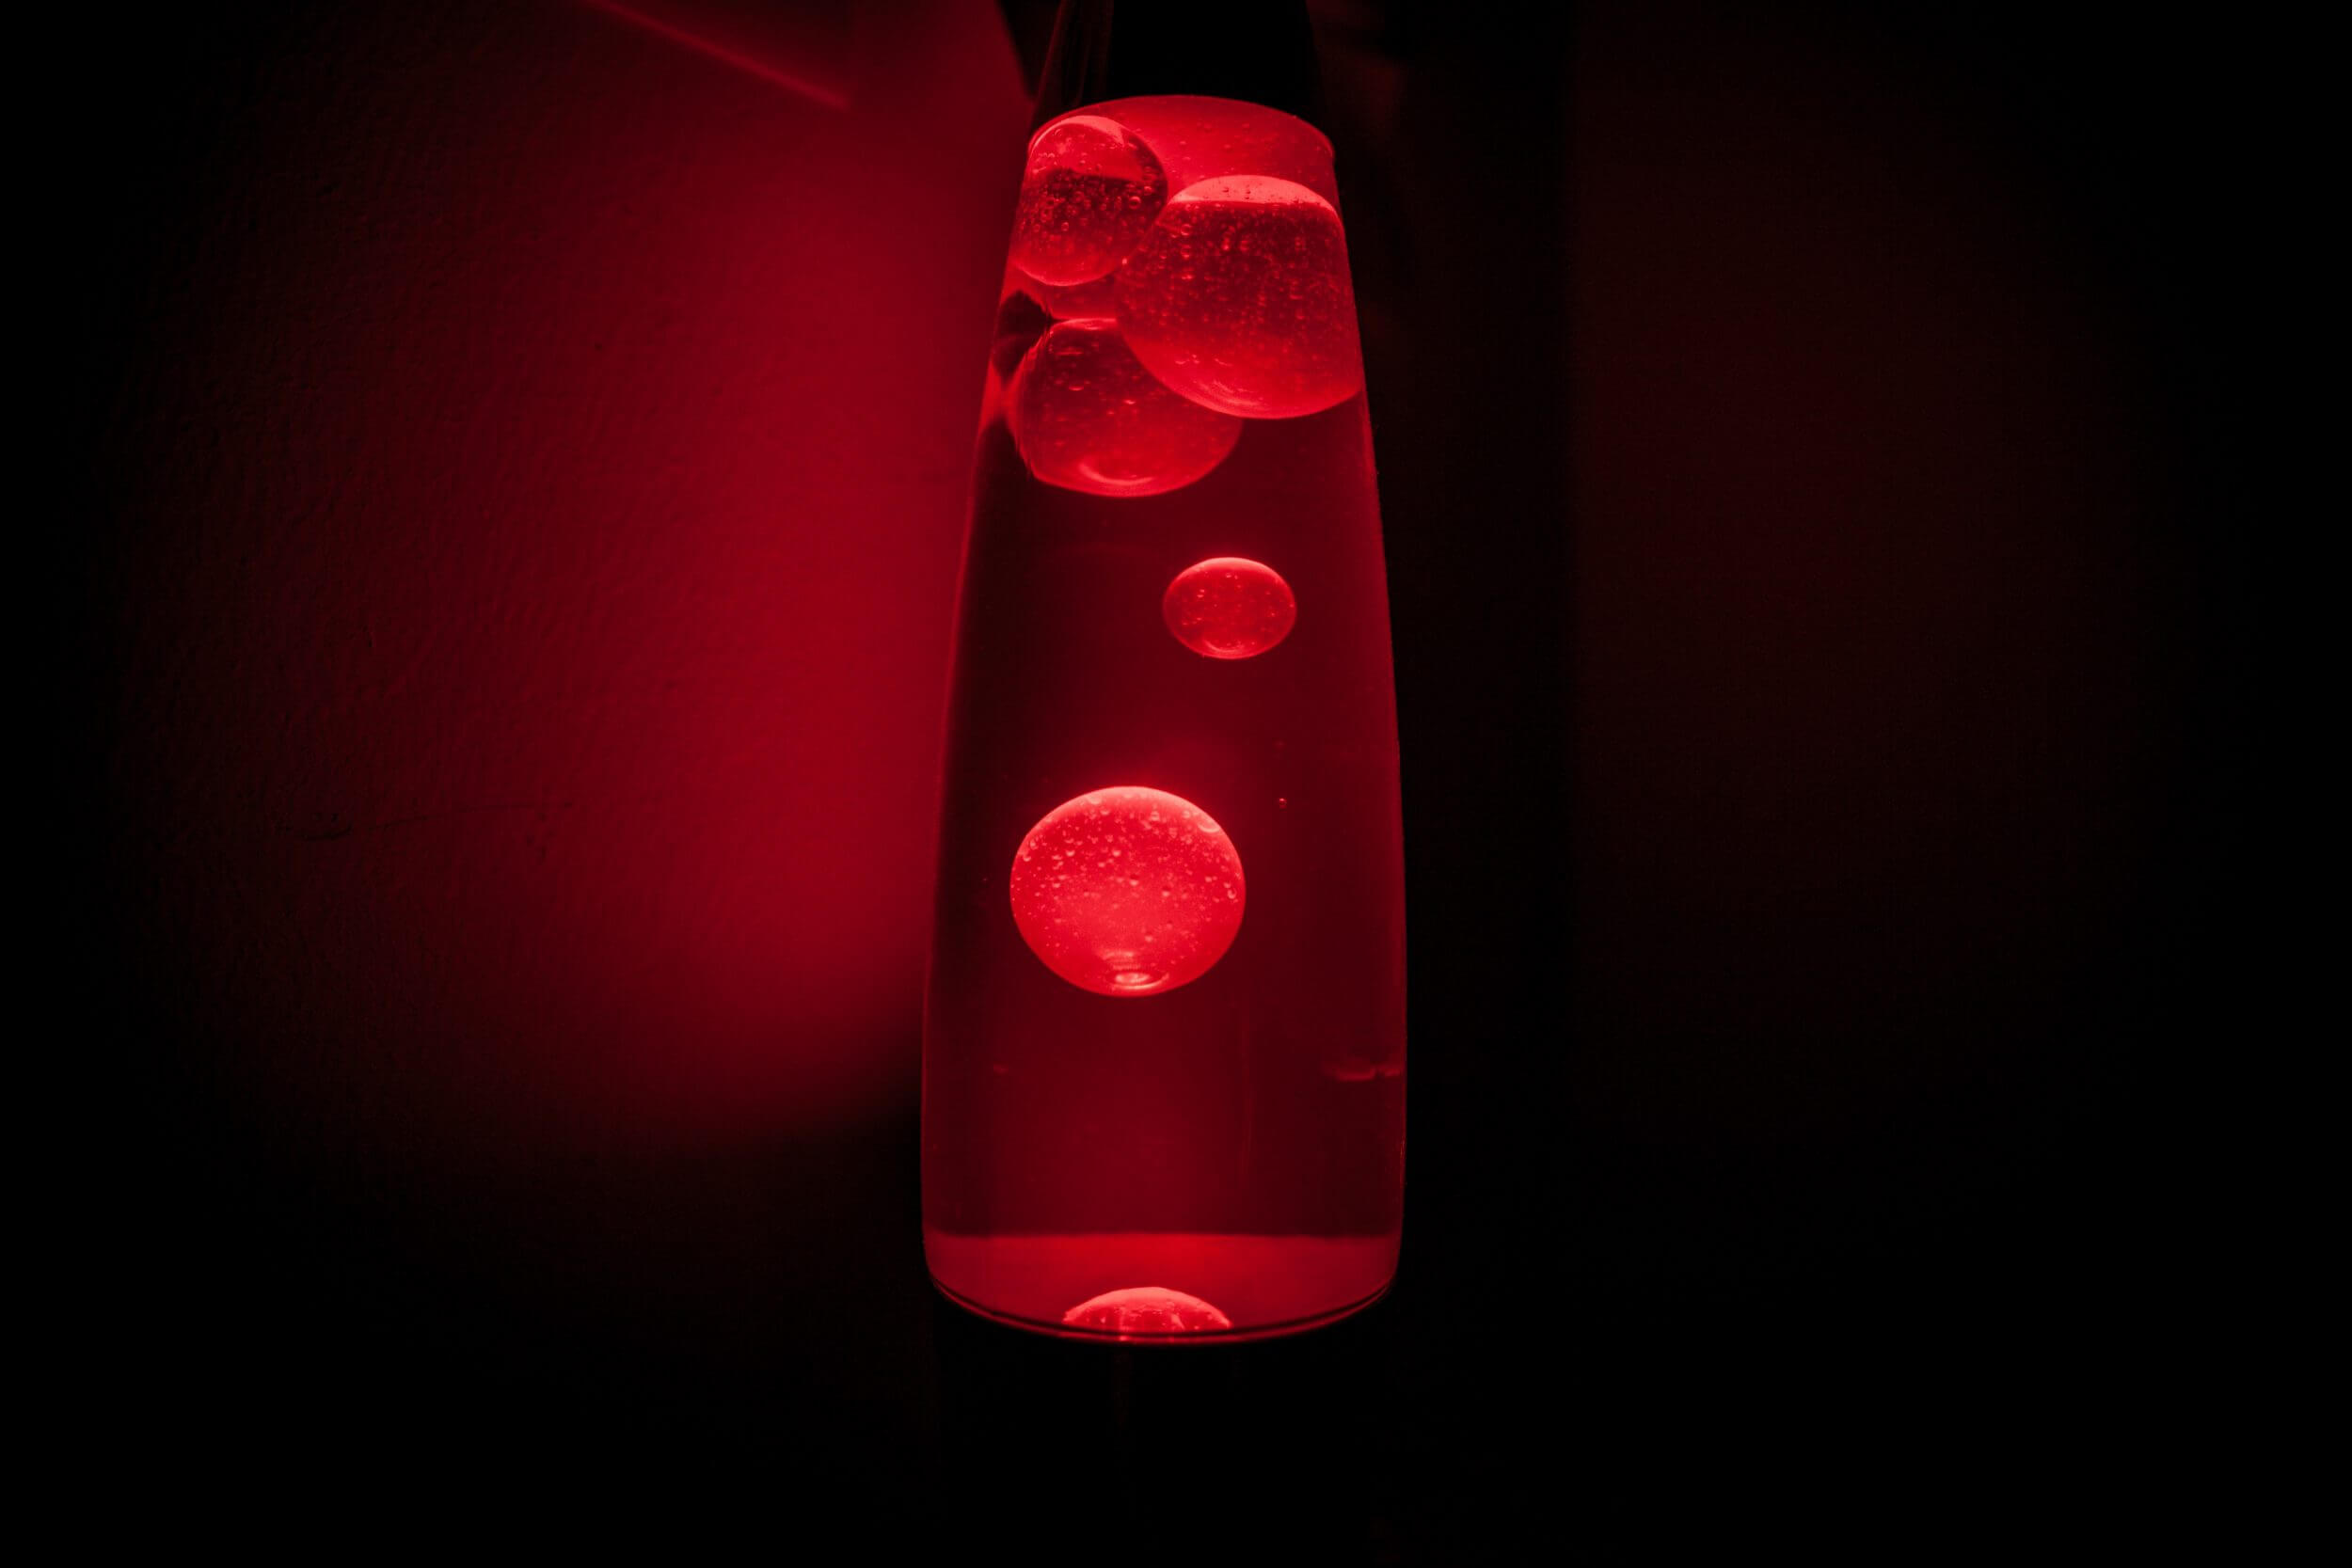 Lava Lamps are a popular incentive prize for fundraising programs